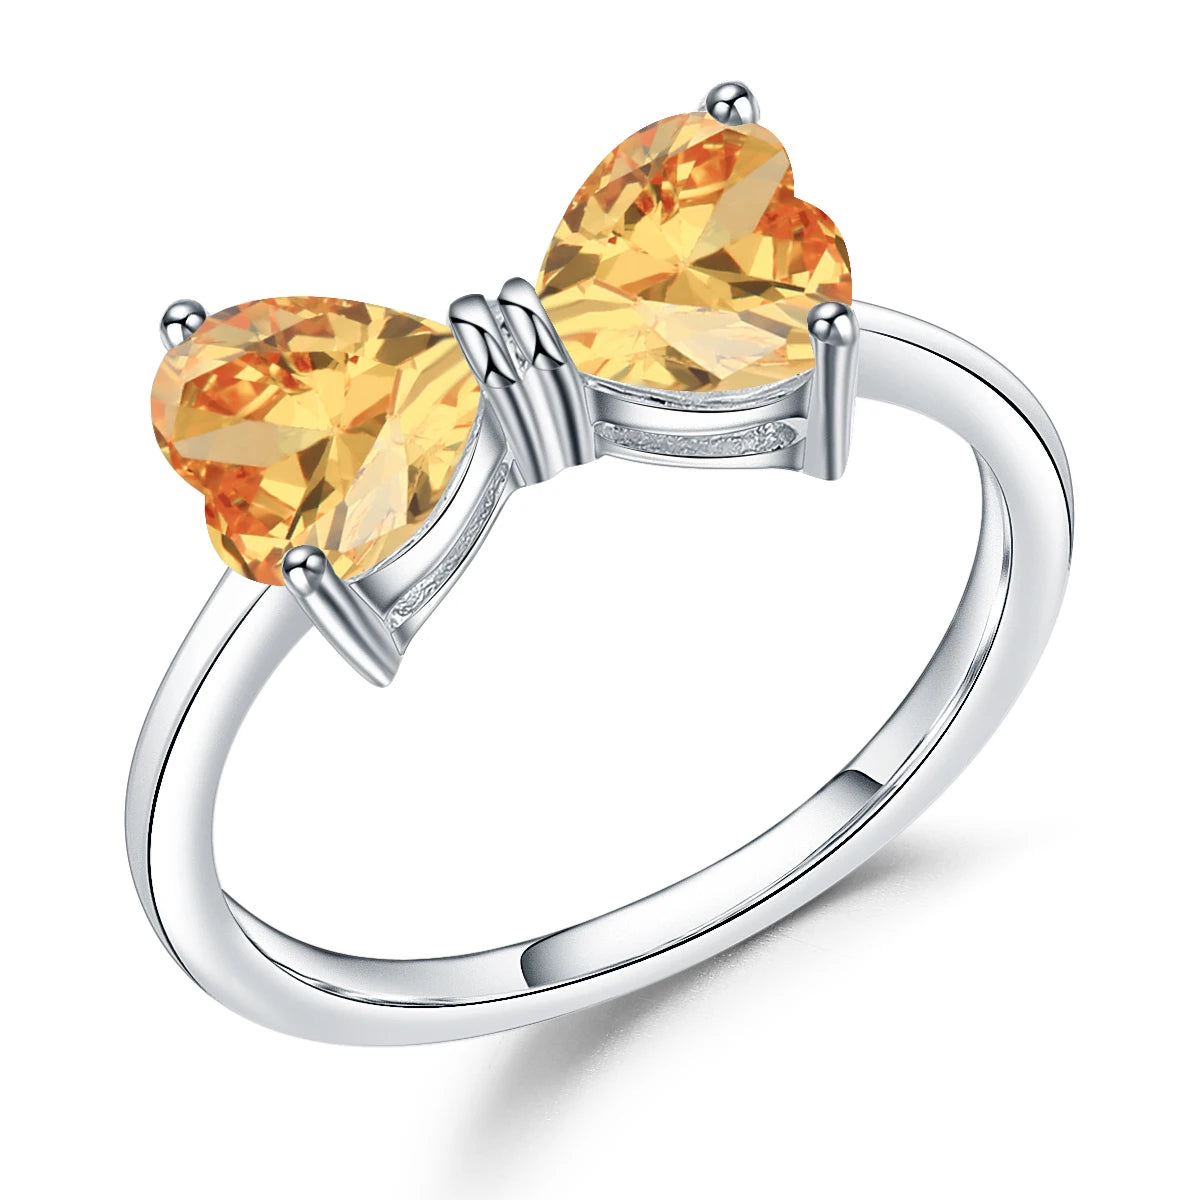 GEM'S BALLET 925 Sterling Silver Bow Knot Ring 1.56Ct Natural Citrine Gemstone Rings For Women Valentine's Day Gift Jewelry Citrine CHINA